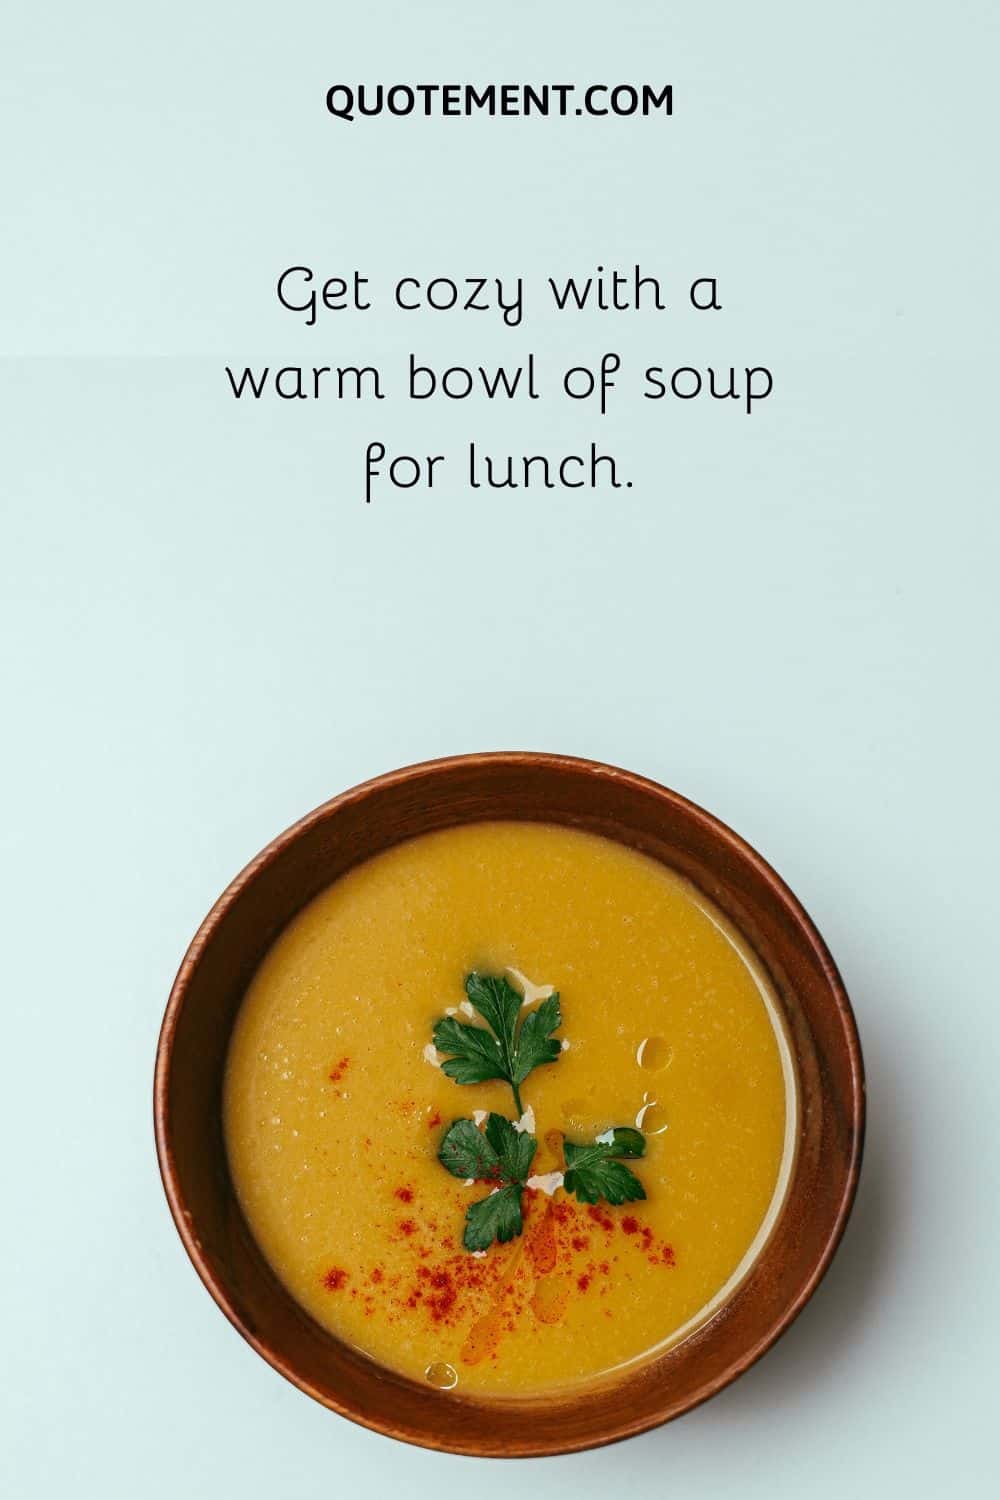 Get cozy with a warm bowl of soup for lunch